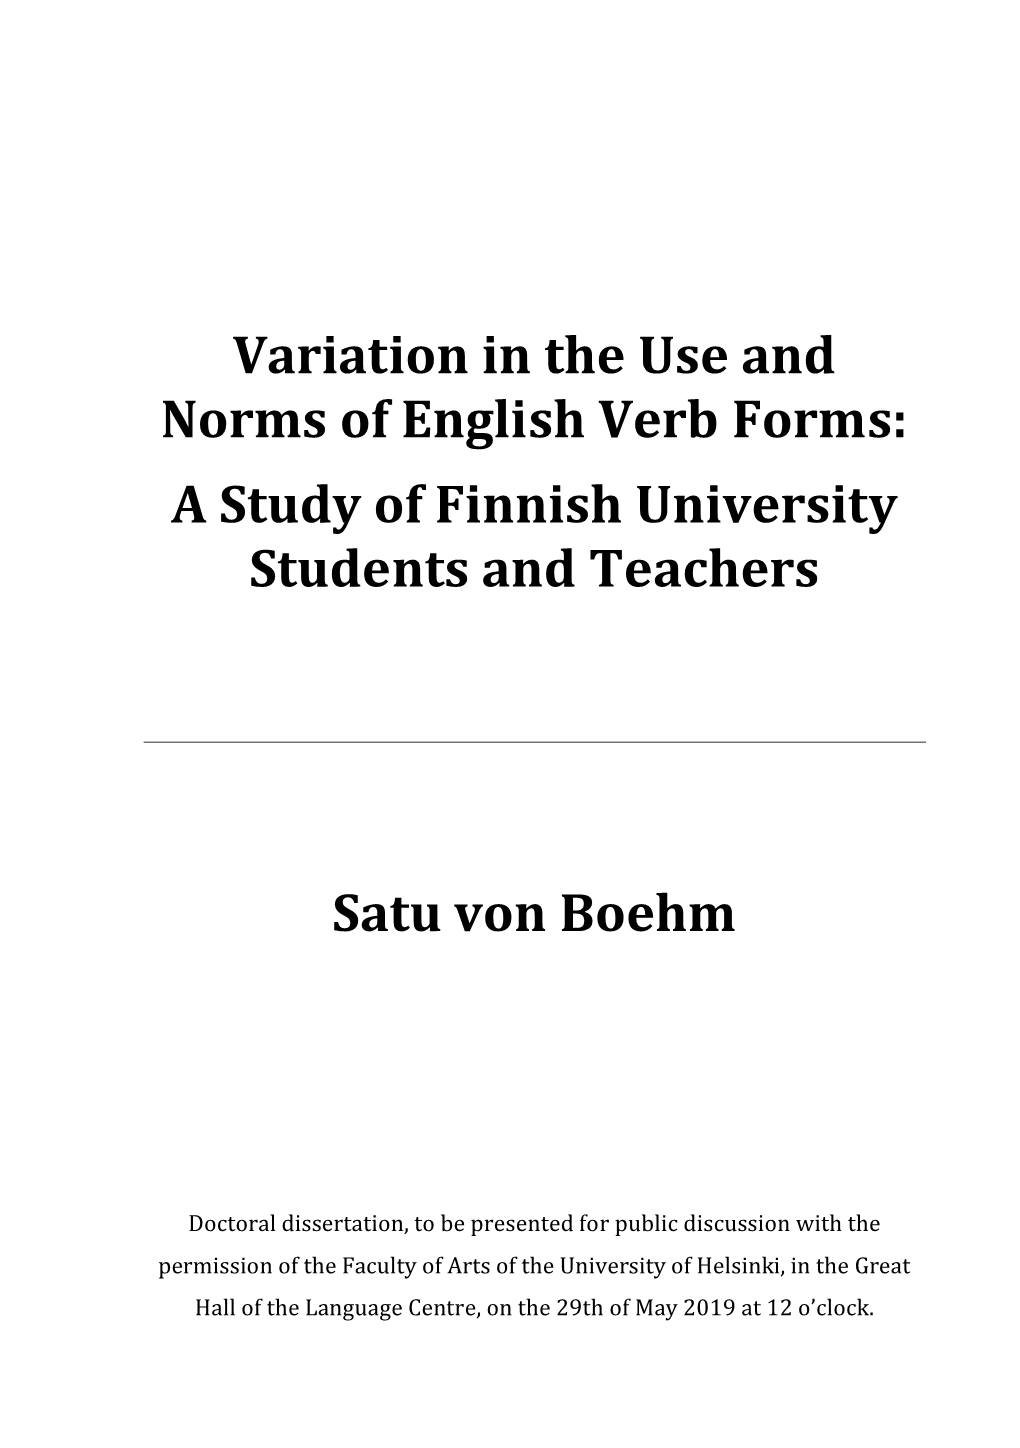 Variation in the Use and Norms of English Verb Forms: a Study of Finnish University Students and Teachers